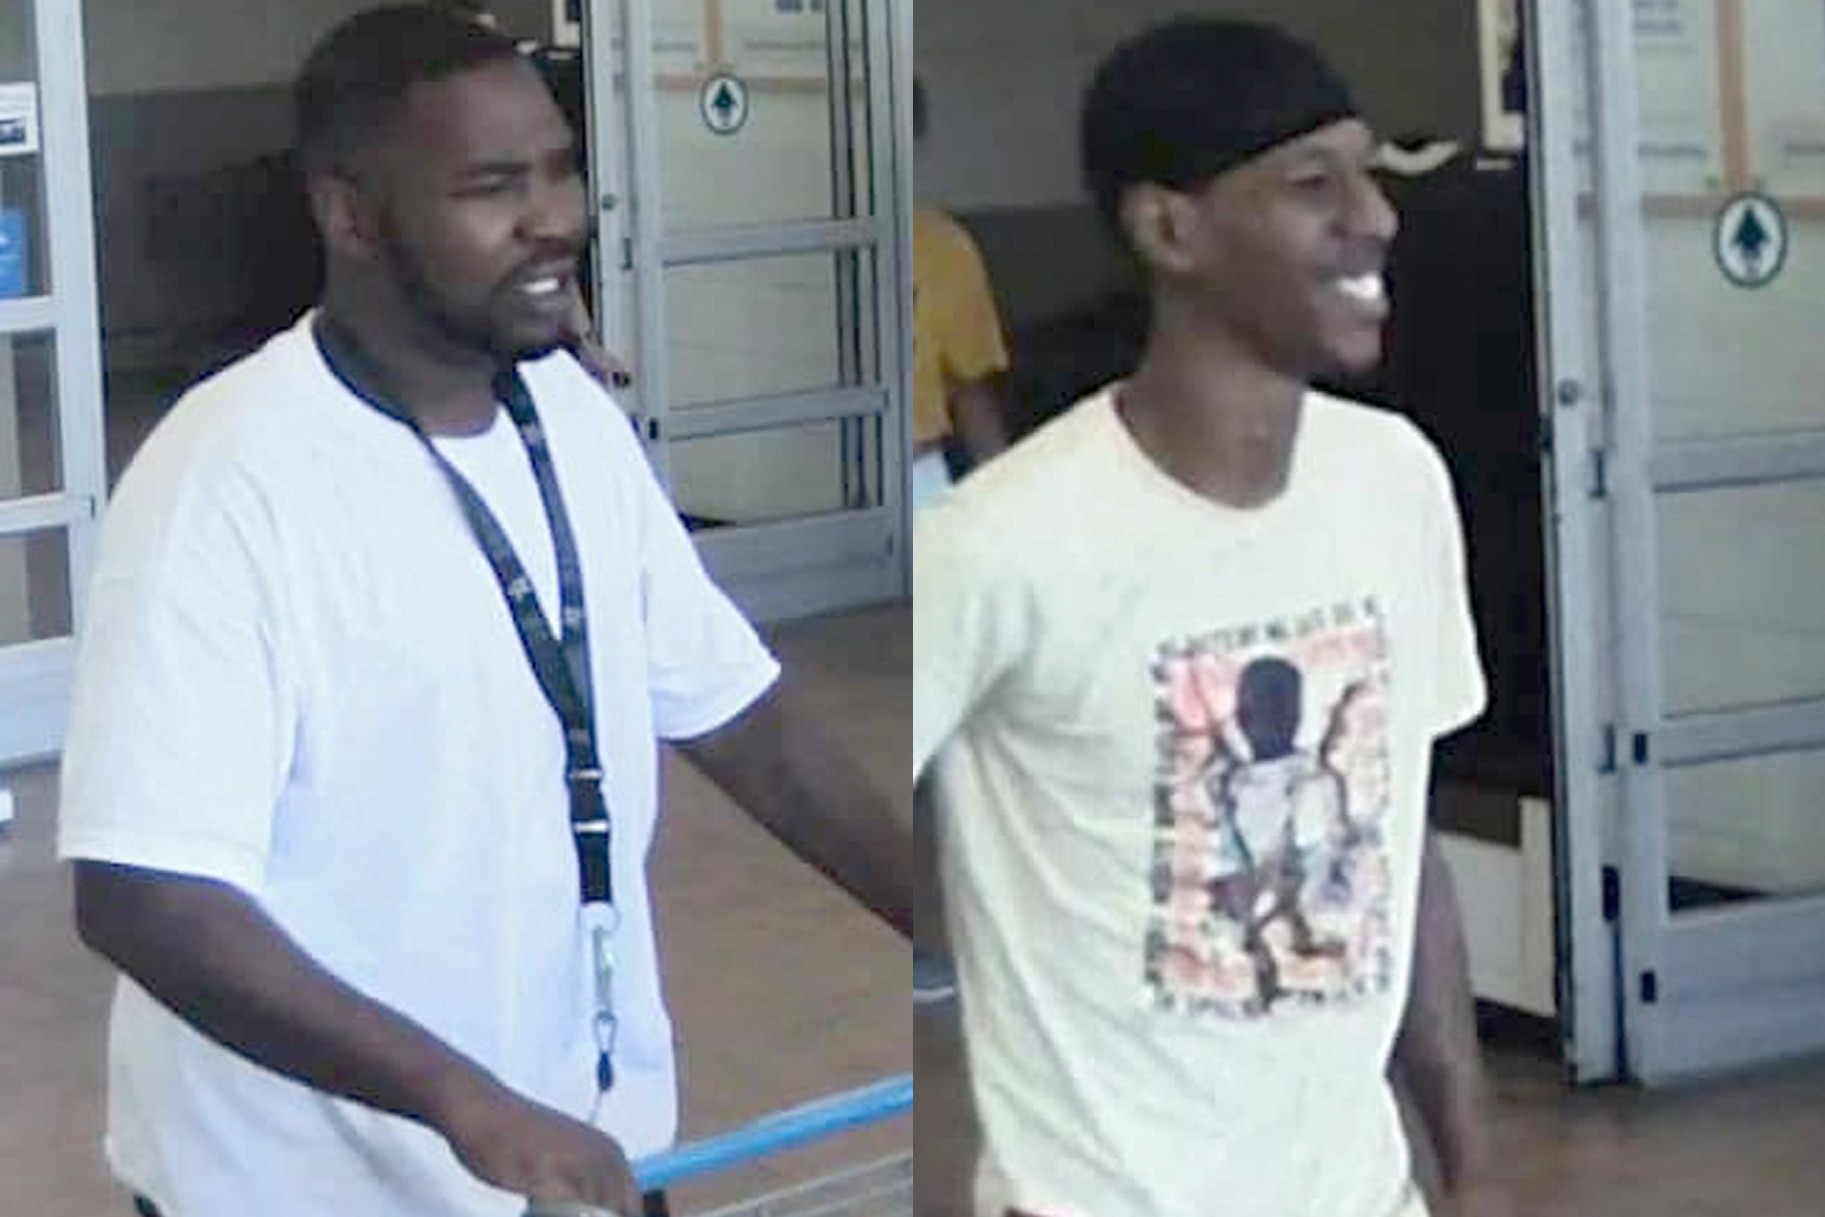 The kidnapping suspects from the Memphis Target